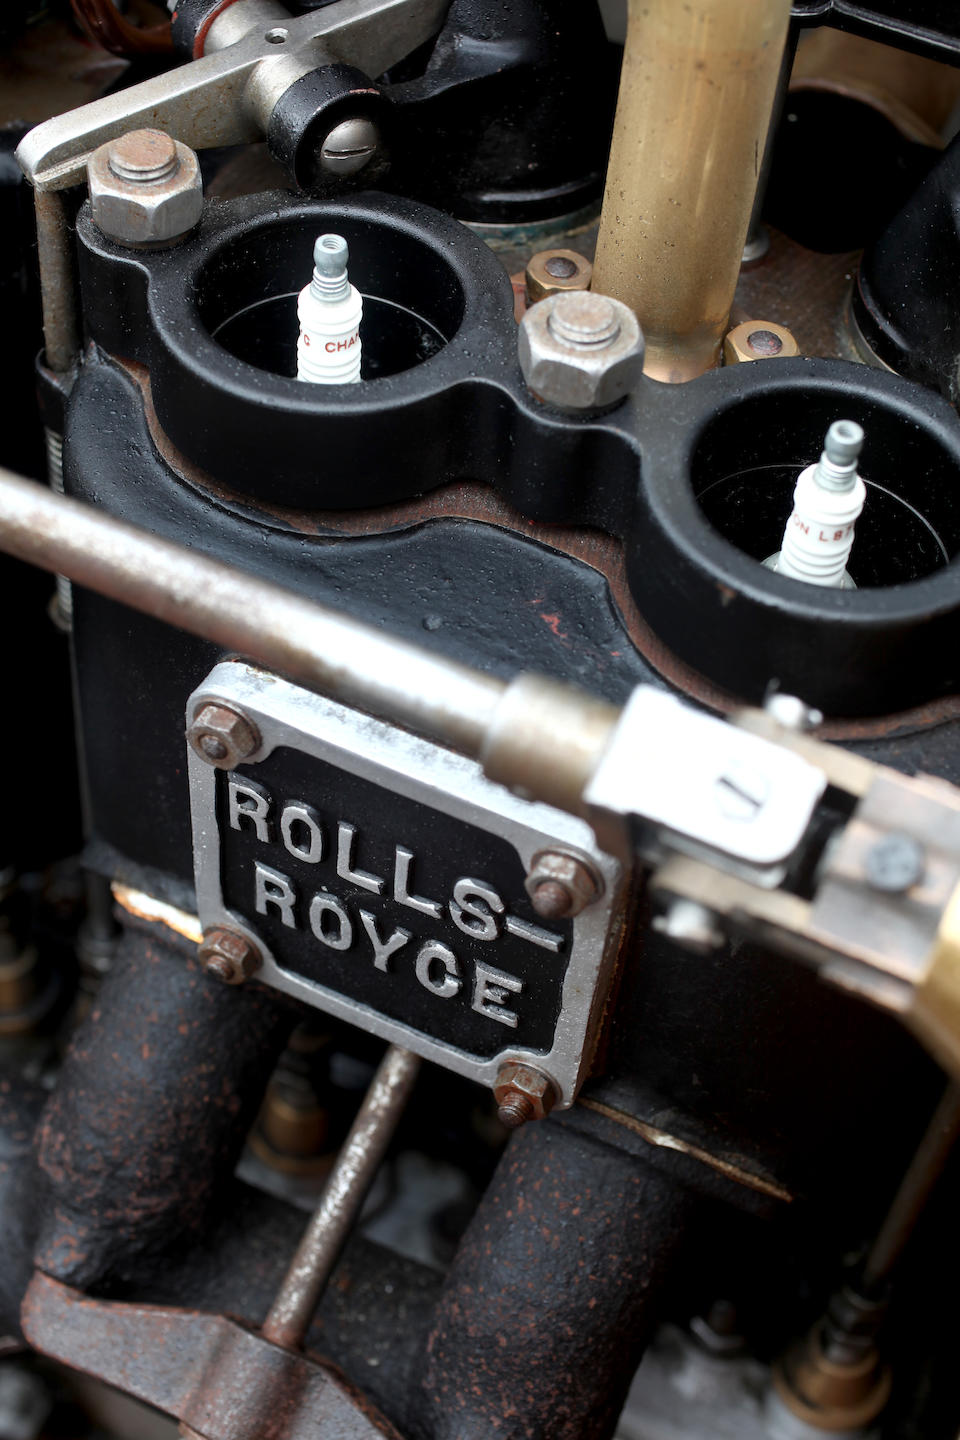 Formerly the property of the late Stanley Sears and the late Thomas Love,1906 Rolls-Royce Light 20hp  Chassis no. 40520 Engine no. 40519